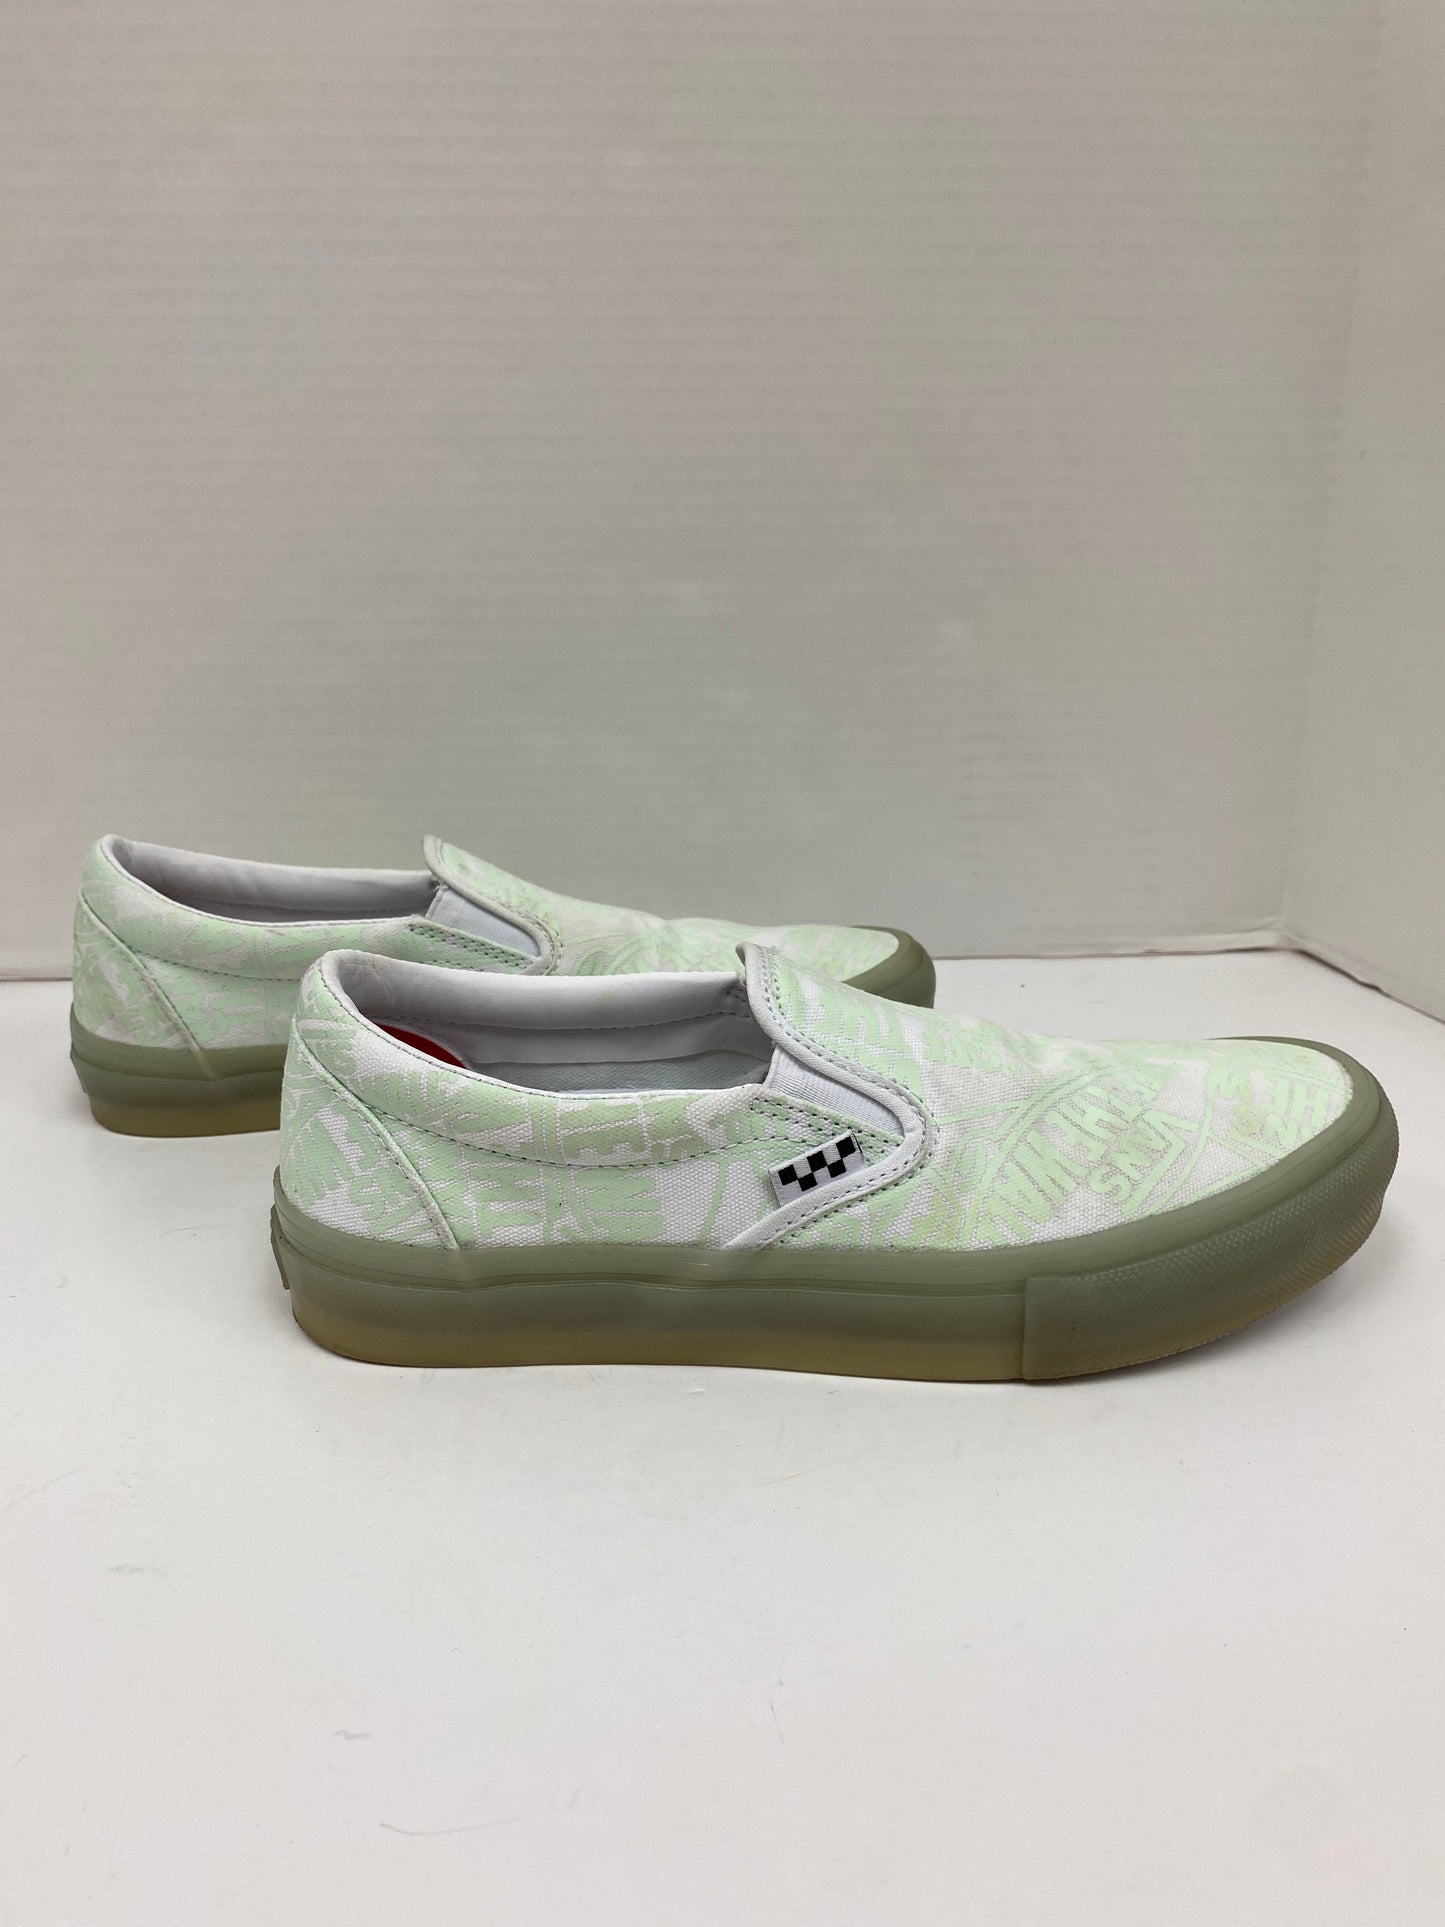 Green Shoes Sneakers Vans, Size 9